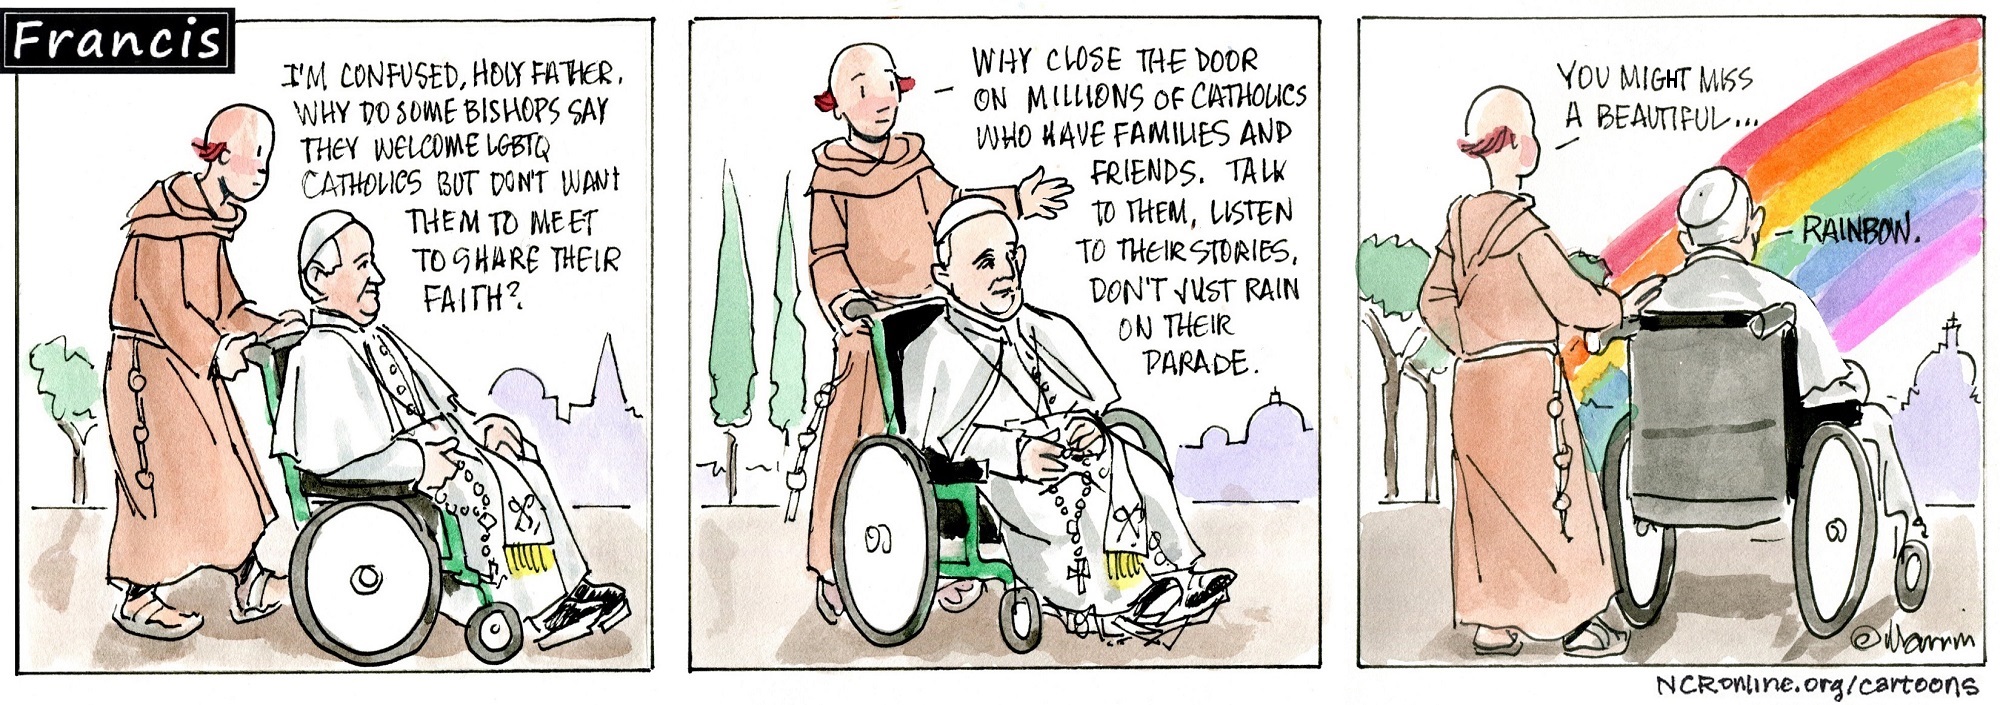 Francis, the comic strip: Francis and Leo talk about welcoming LGBTQ Catholics.